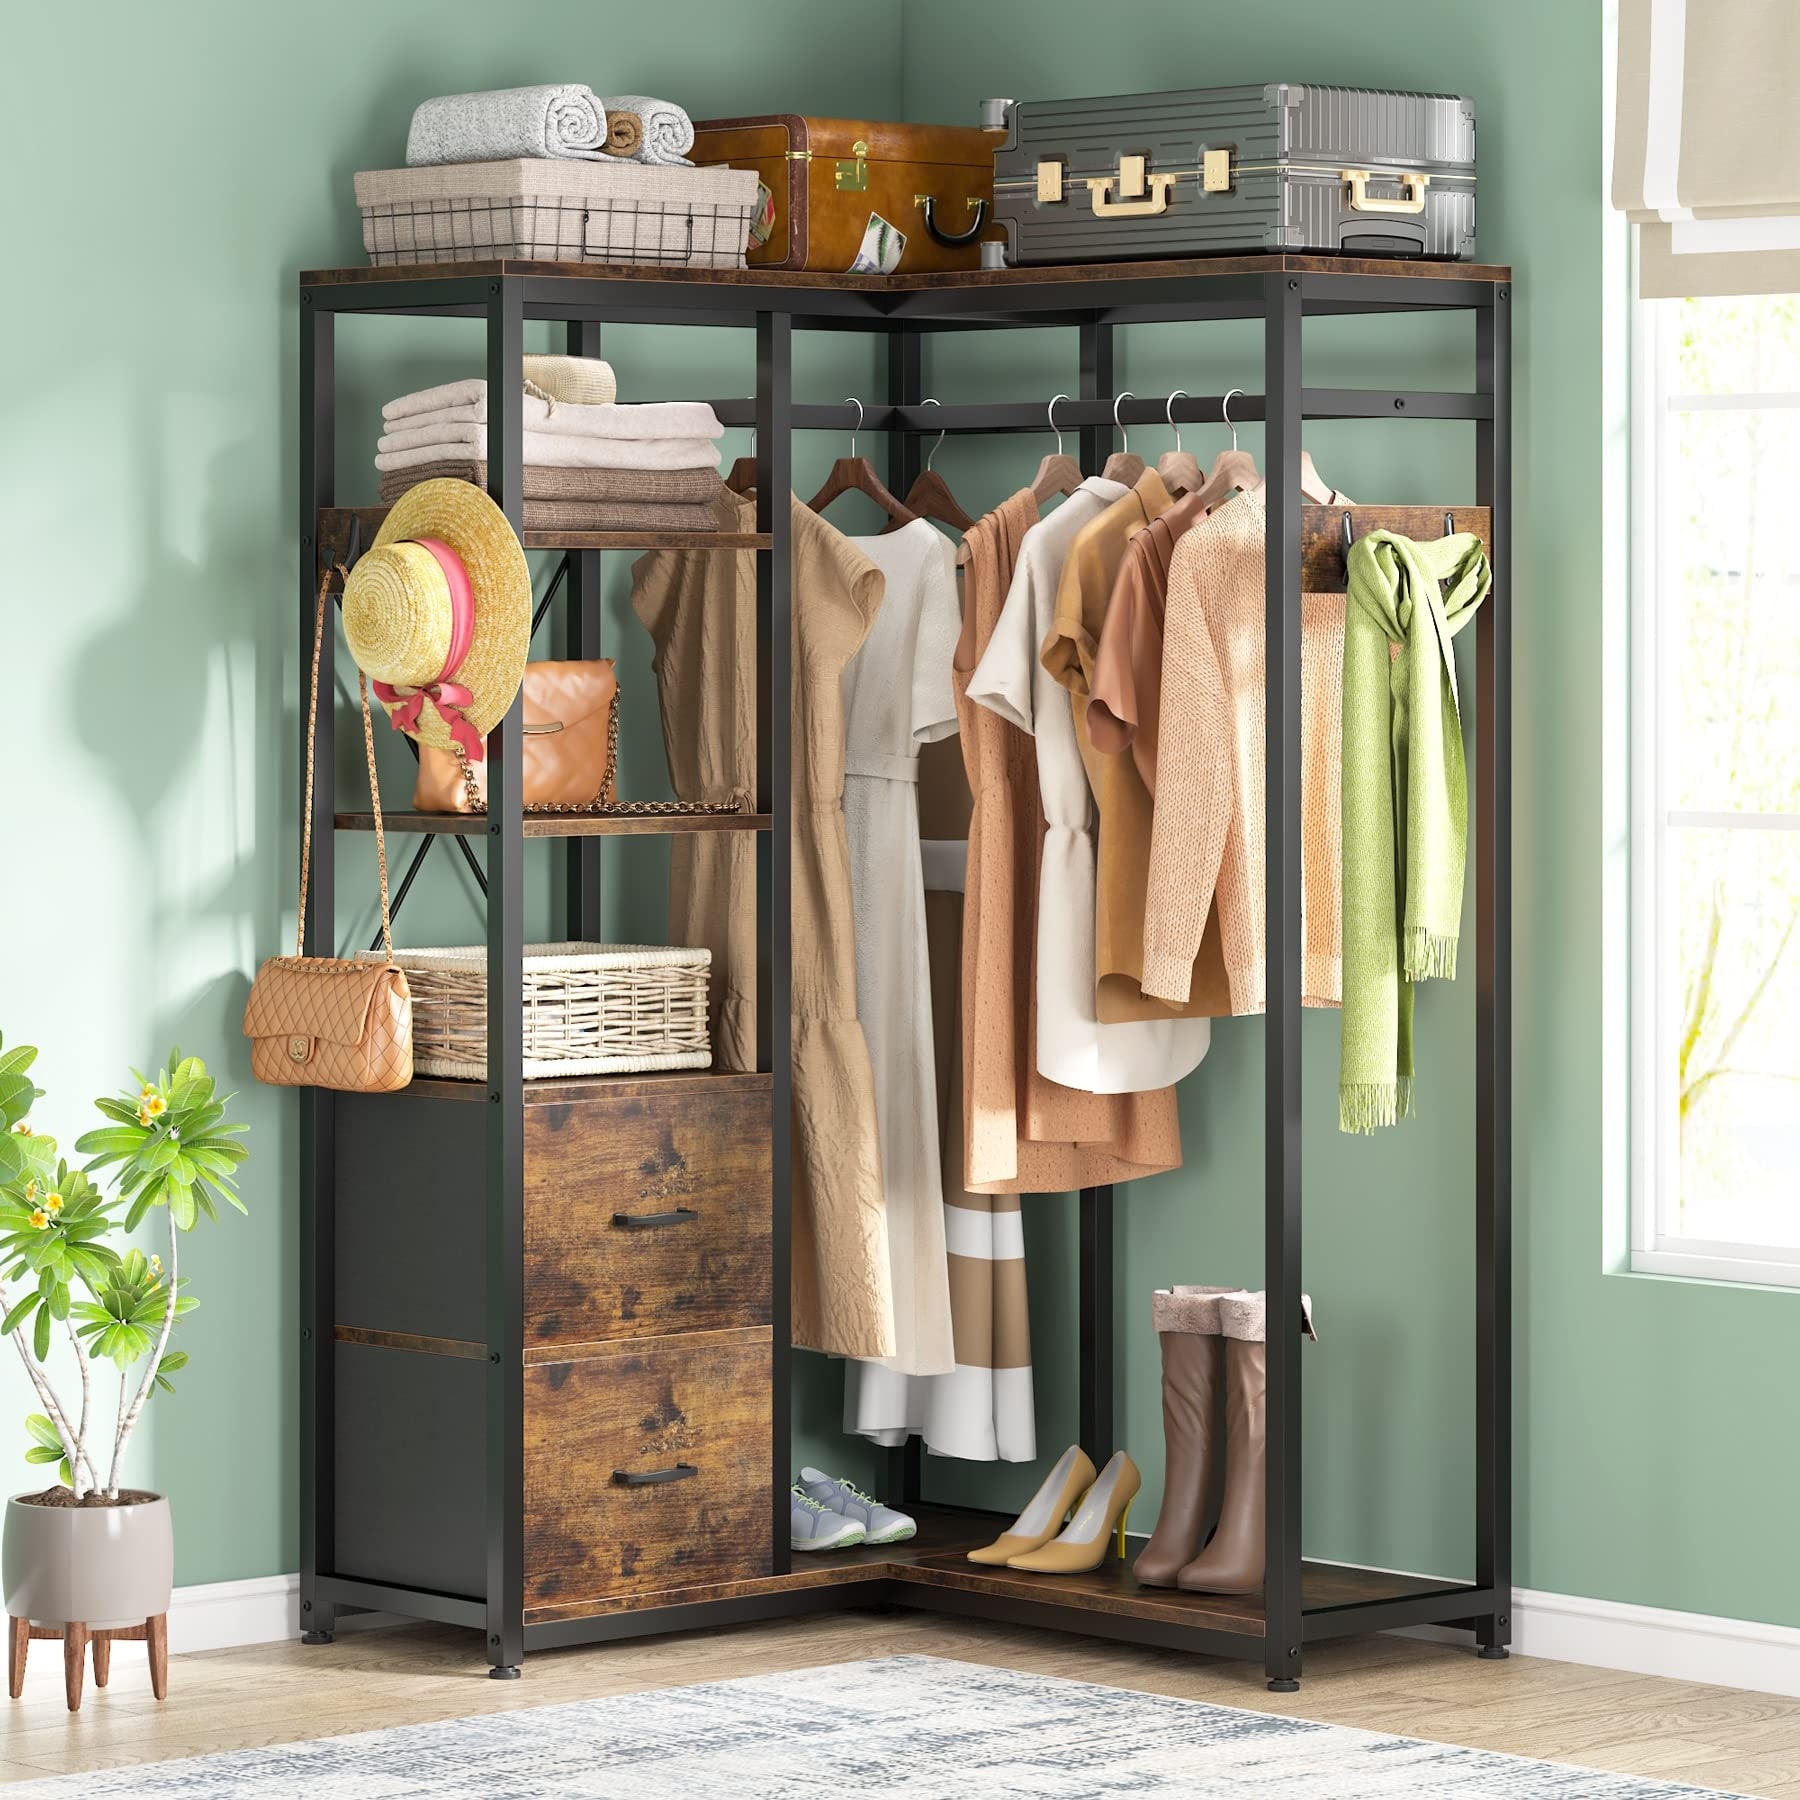 https://ak1.ostkcdn.com/images/products/is/images/direct/14d62682984b88a07522acae4e427633a6ffcea5/Corner-Clothes-Rack%2C-L-Shaped-Garment-Rack-with-Shelves-and-2-Drawers%2C-Industrial-Freestanding-Closet-Organizer%2C-Clothing-Rack.jpg